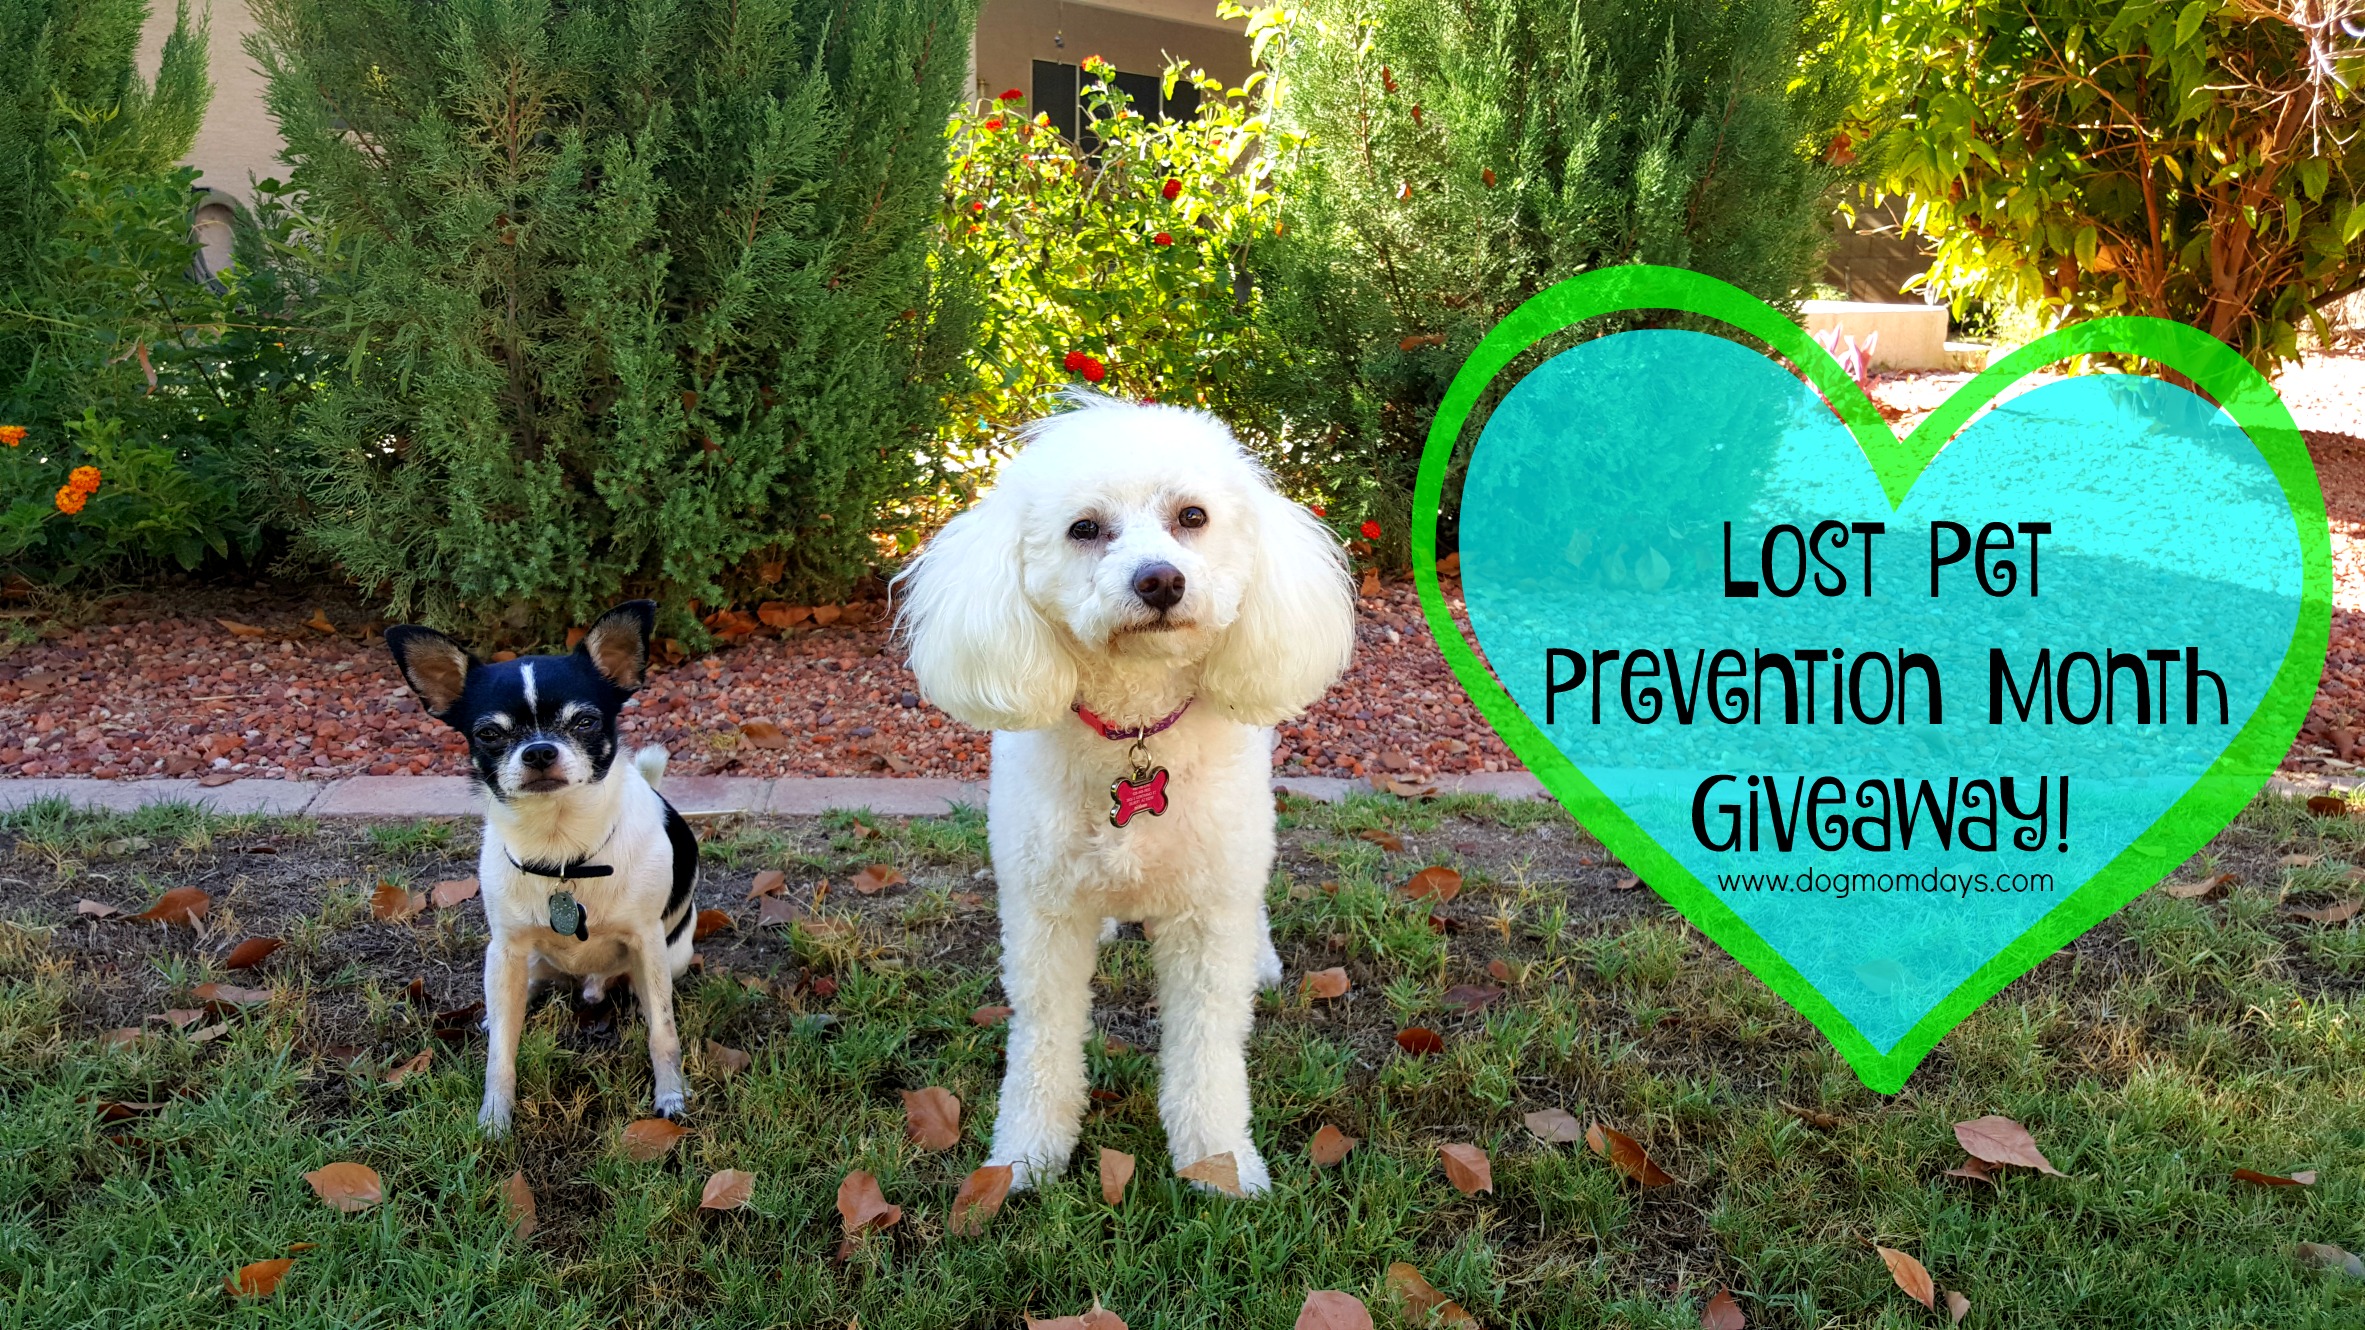 Lost Pet Prevention Month